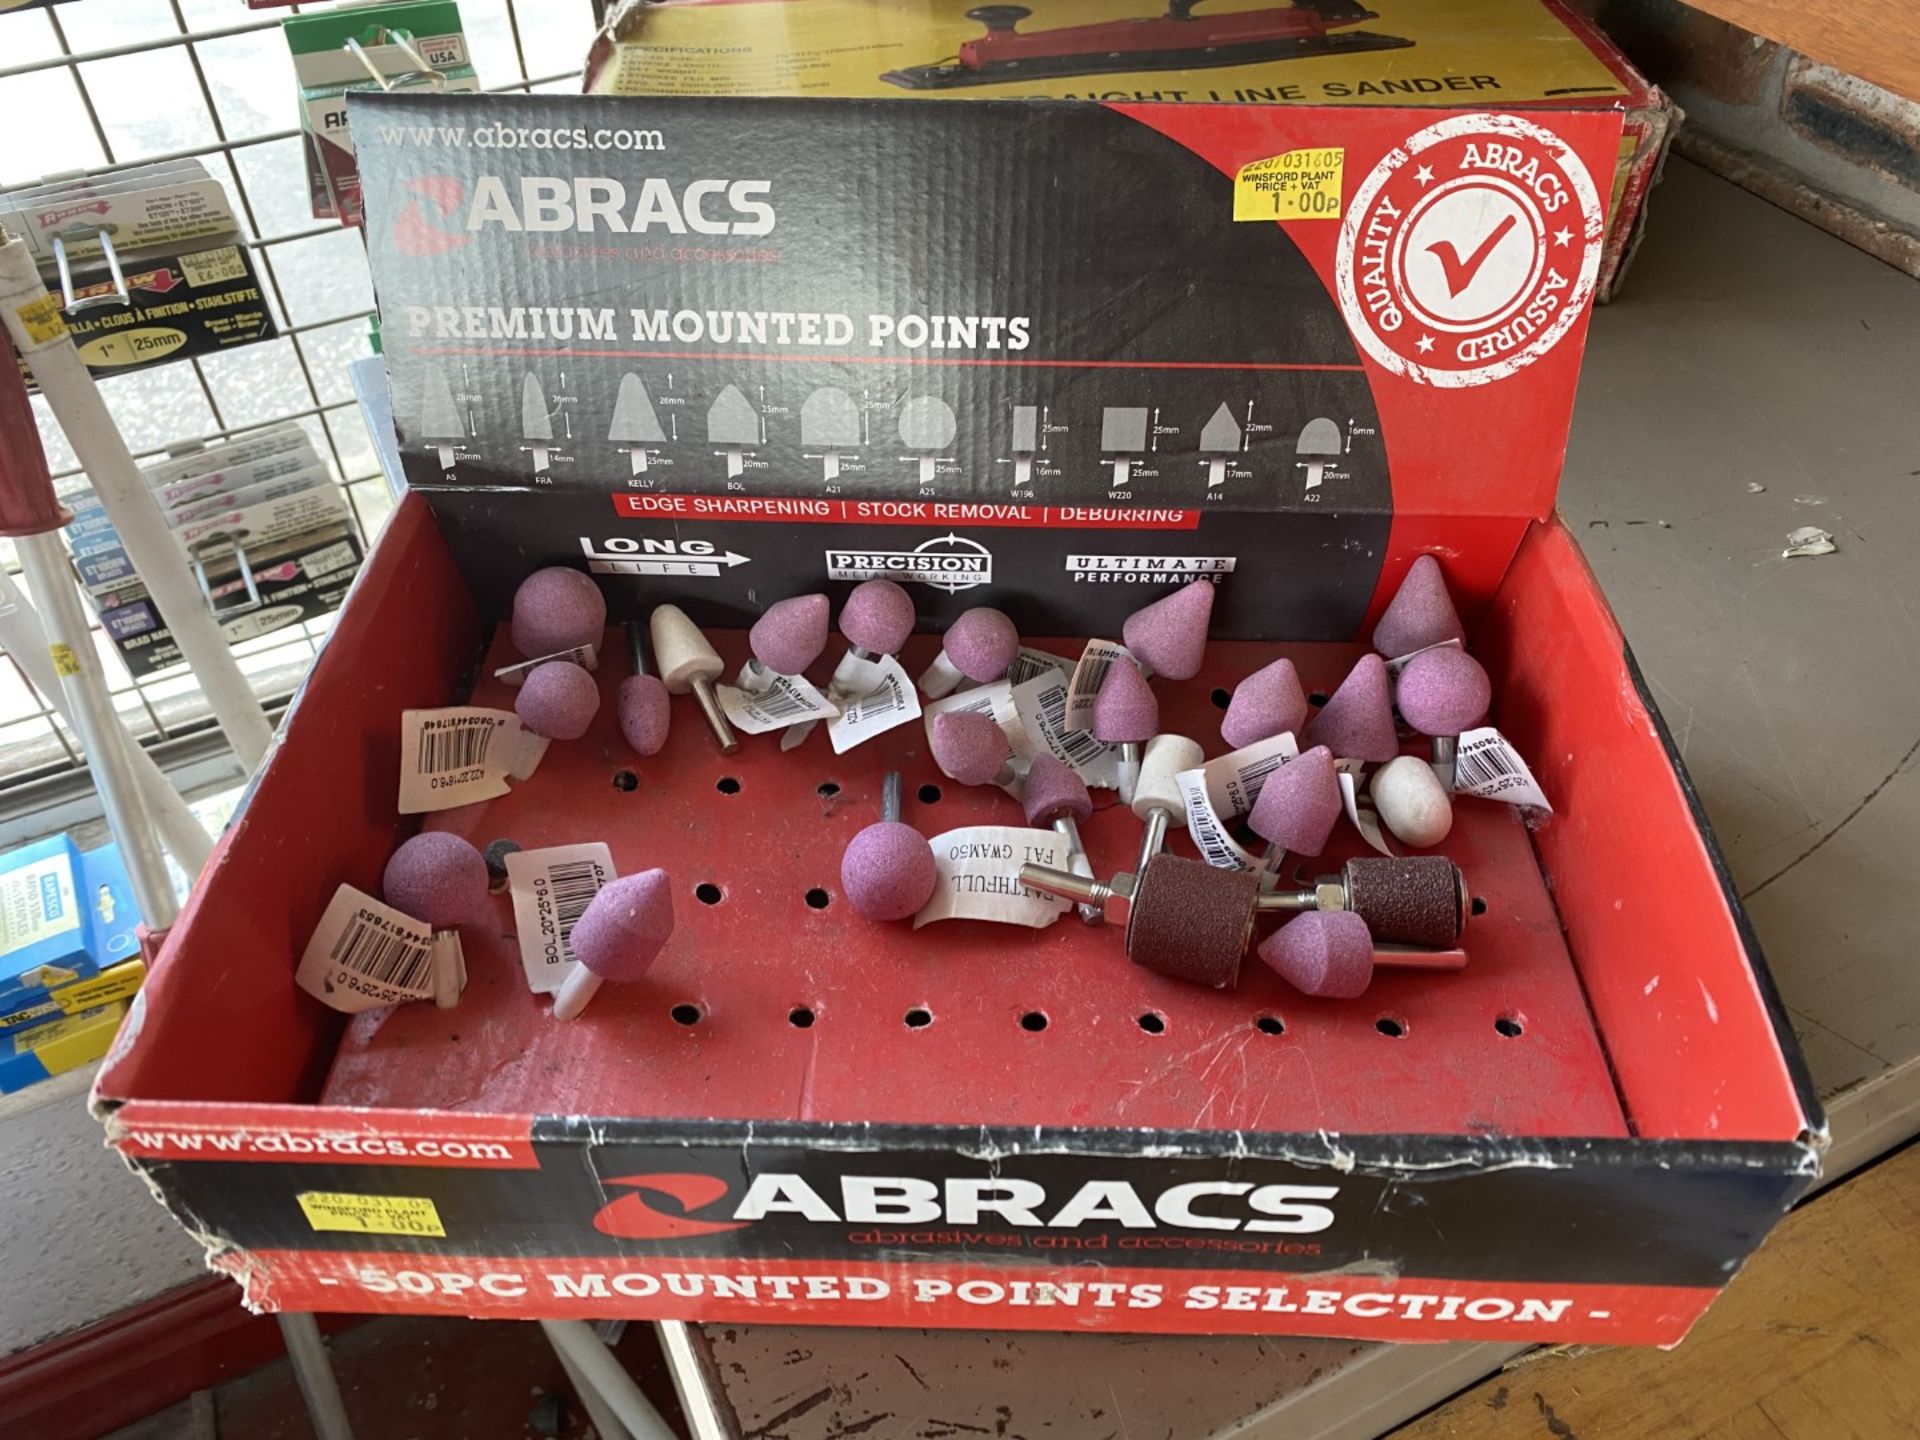 Abracs assortment of mounted points